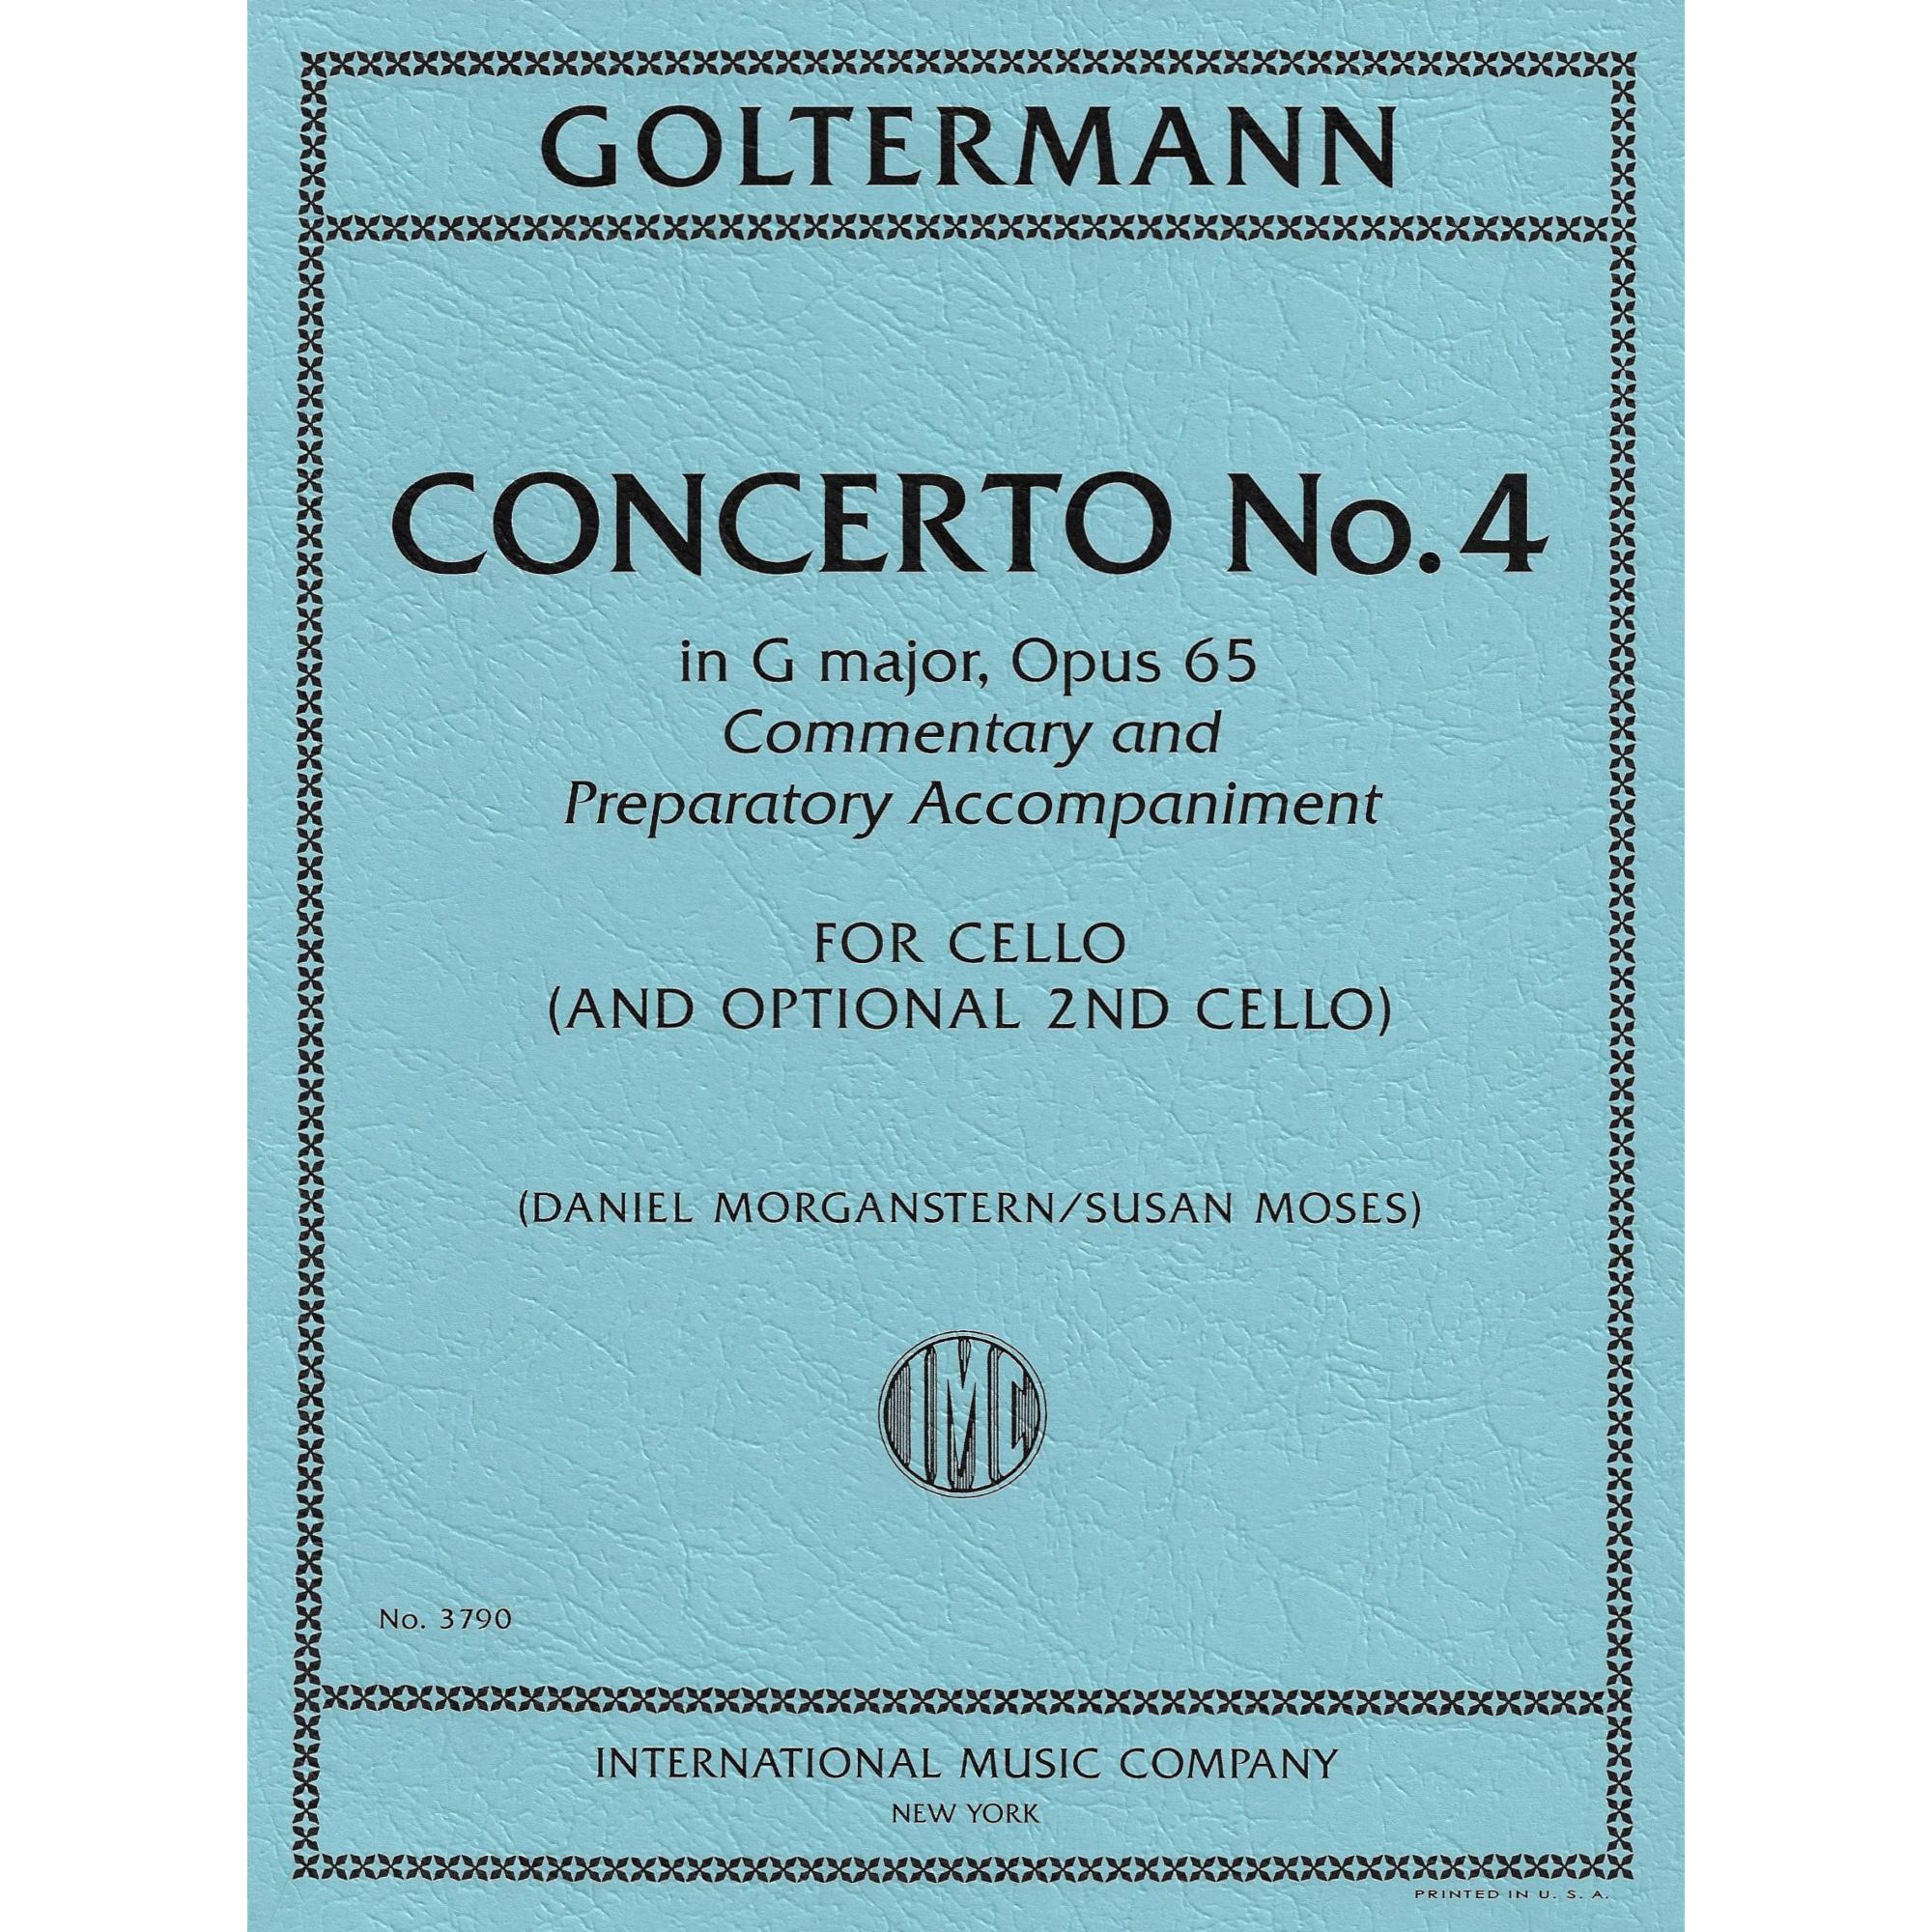 Goltermann -- Concerto No. 4 in G Major, Op. 65 for Two Cellos